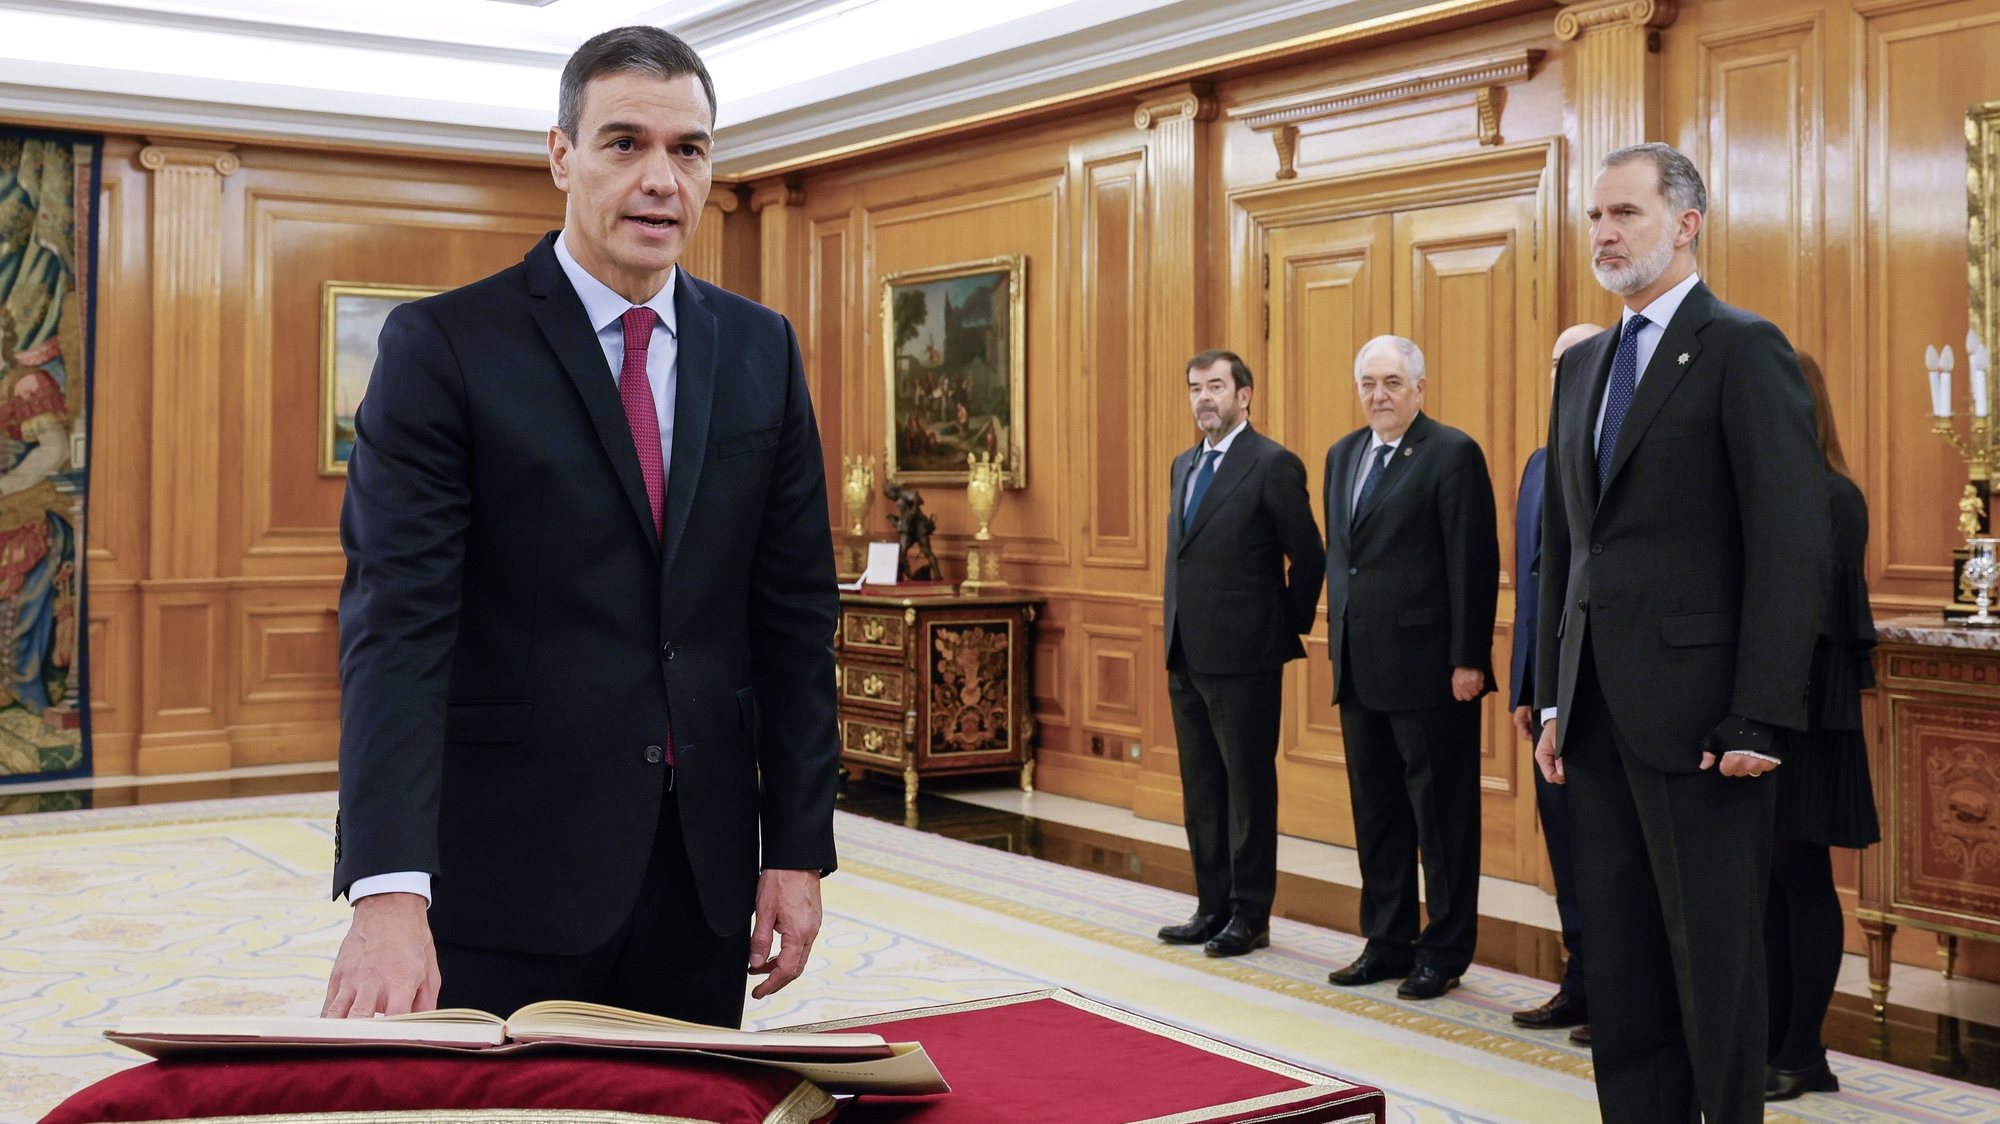 epa10980264 Pedro Sanchez (L) is sworn in as Prime Minister before Spain&#039;s King Felipe VI (R) and the Constitution at the Zarzuela Palace, in Madrid, Spain, 17 November 2023. The Spanish parliament confirmed Pedro Sanchez as prime minister on 16 November, bringing an end to months of political uncertainty in the country. Sanchez secured 179 votes, three more than the required absolute majority in the 350-member house.  EPA/BALLESTEROS / POOL